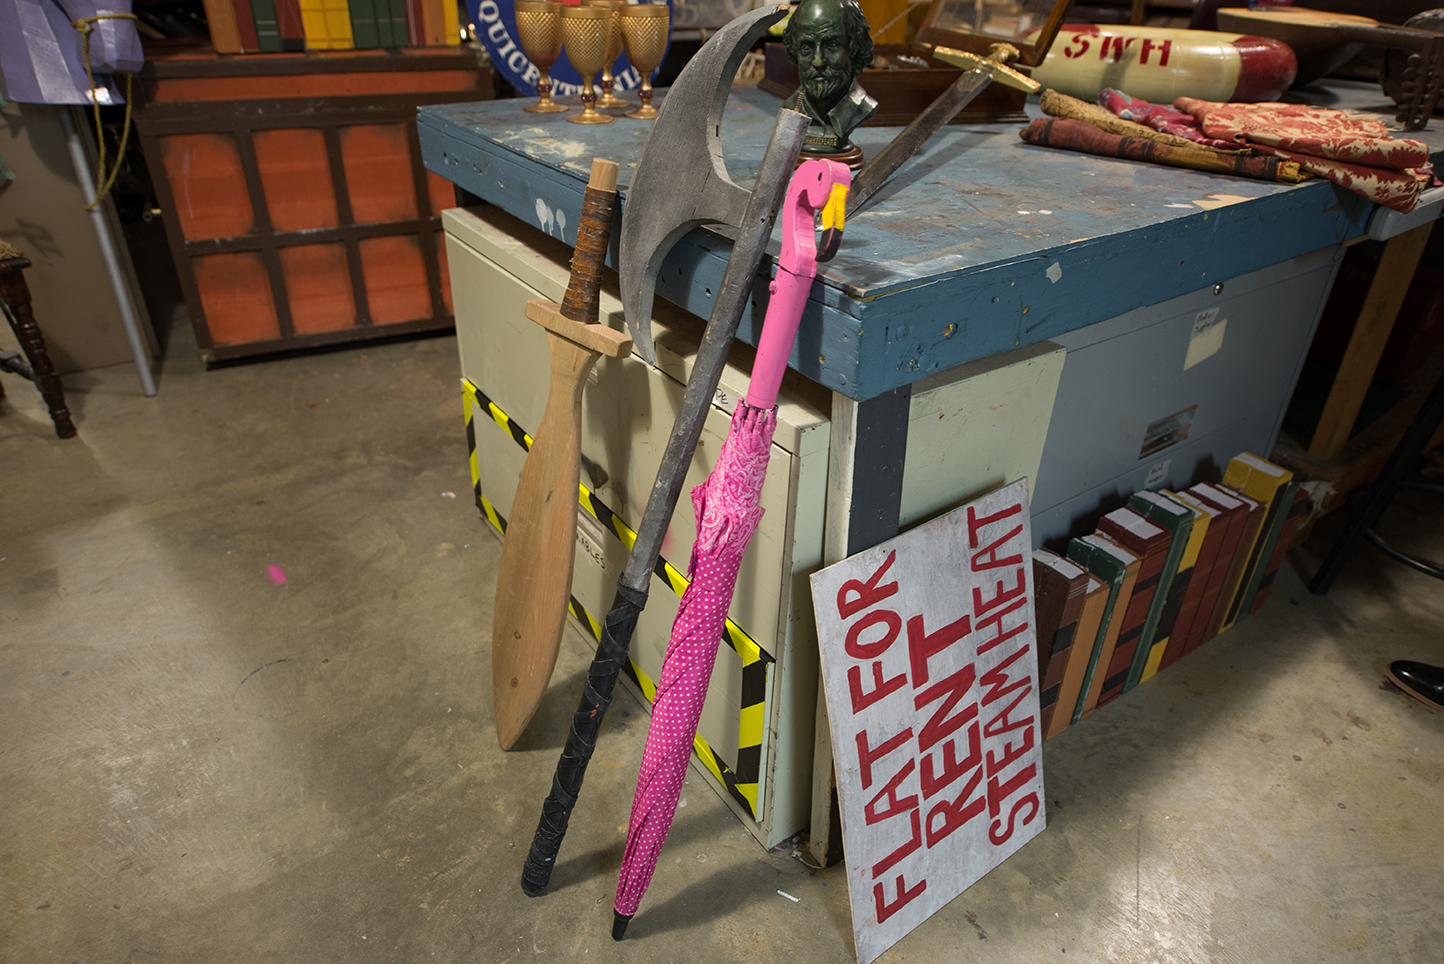 The weapons in the prop shop can look quite imposing (note large axe and swords), but they are all non-lethal, safe props. Professor Paul Denhardt is the department’s weapons expert, fight coordinator, and is a director. He teaches classes in movement.